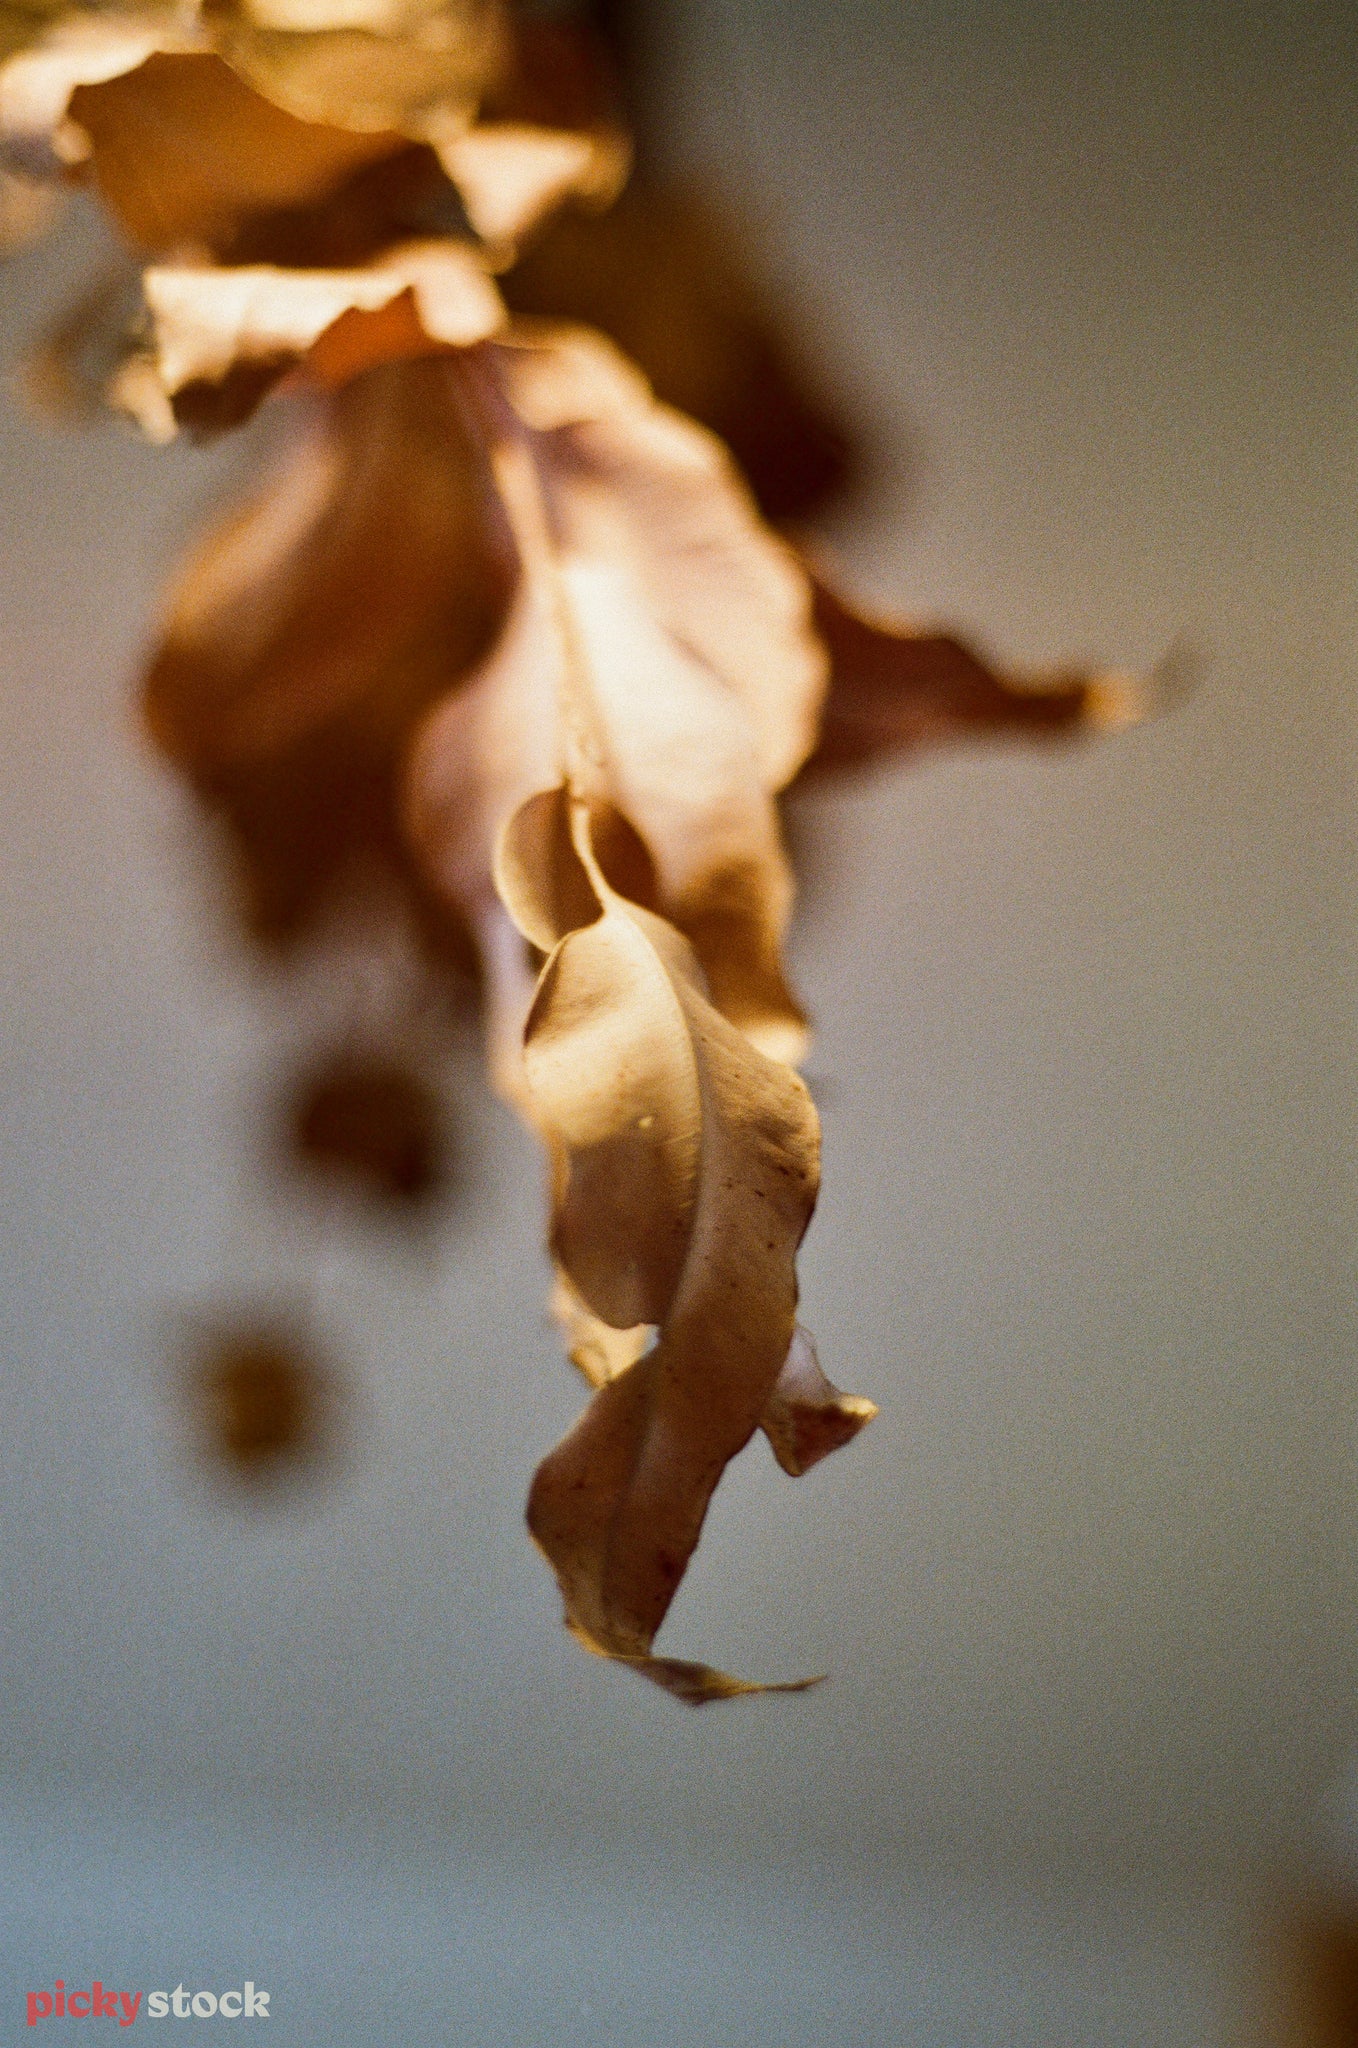 Close up of a dried stem of a flower. Background is a soft grain. Light source coming from the top